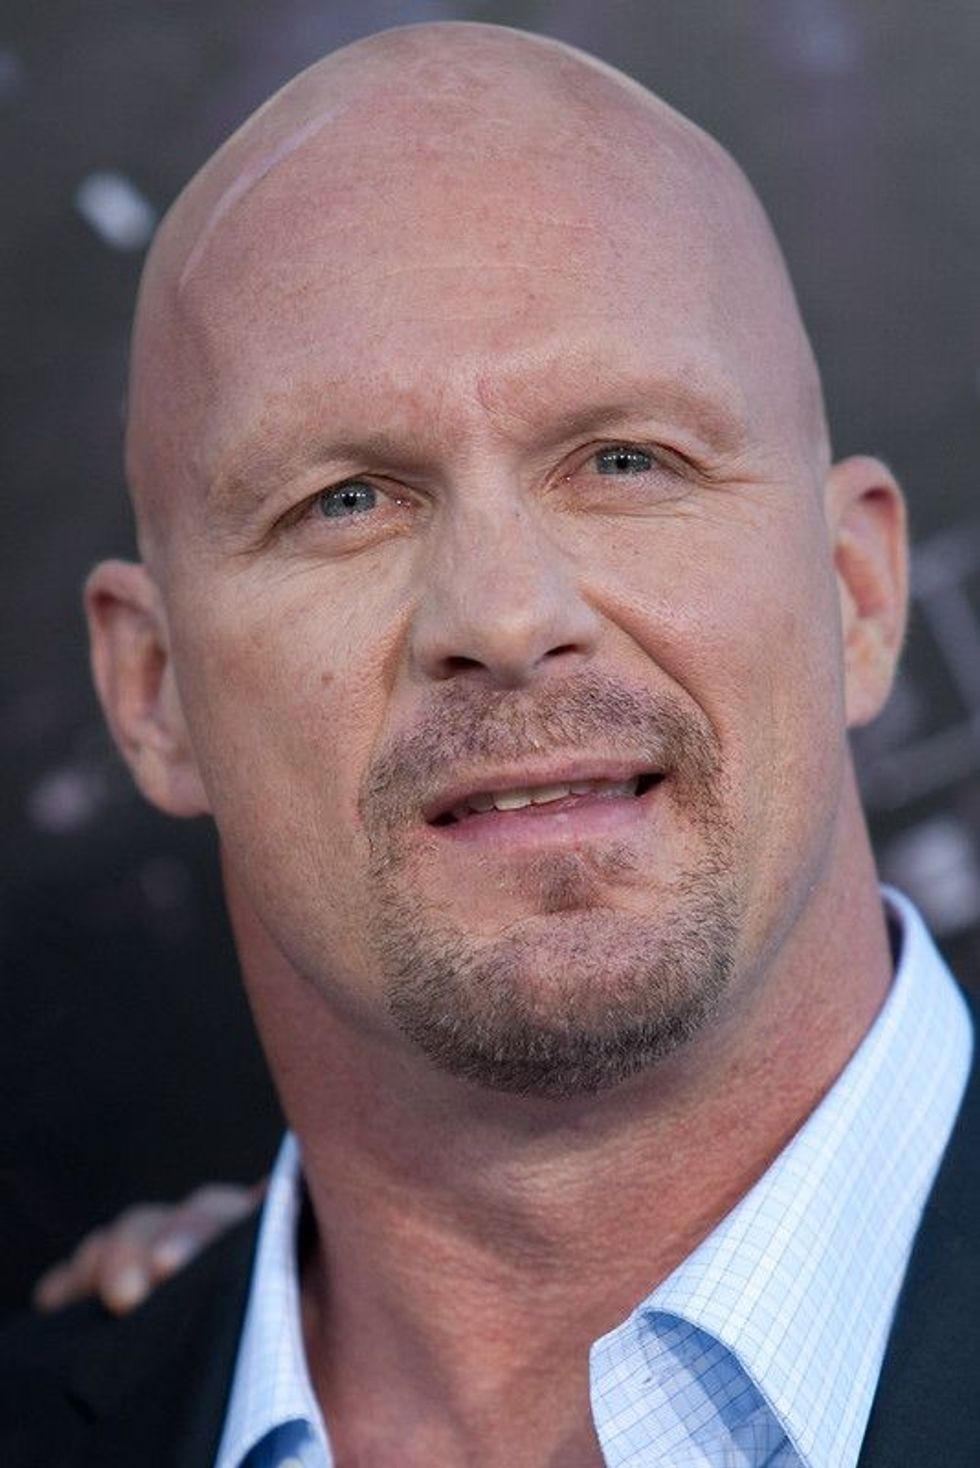 Candid Image of "Stone Cold" Steve Austin